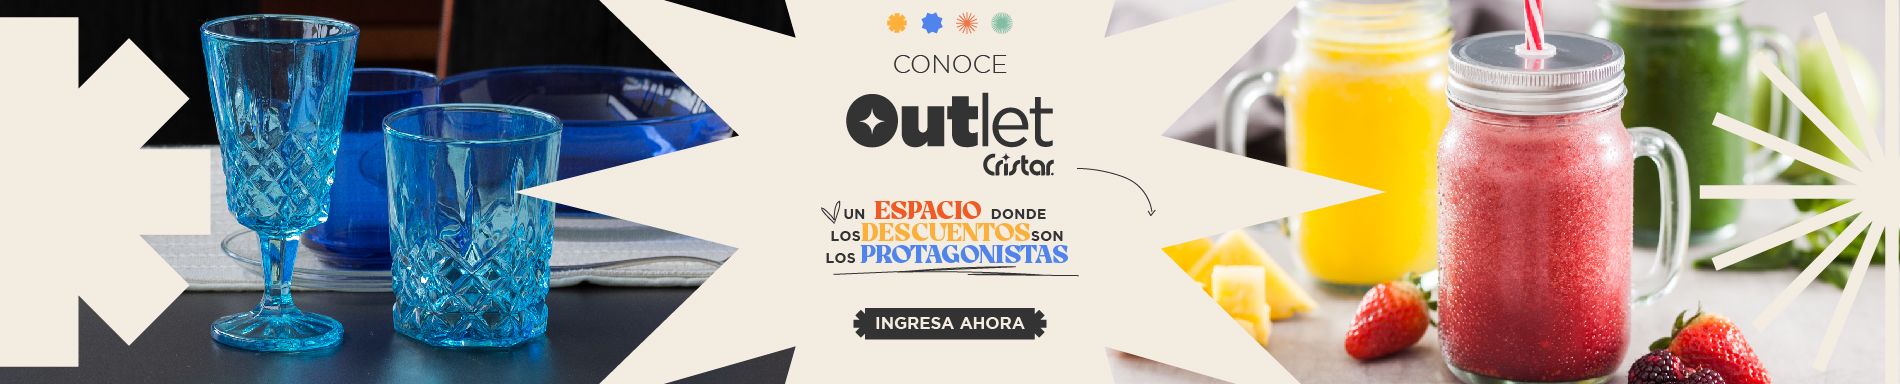 outlet-productos-cristar